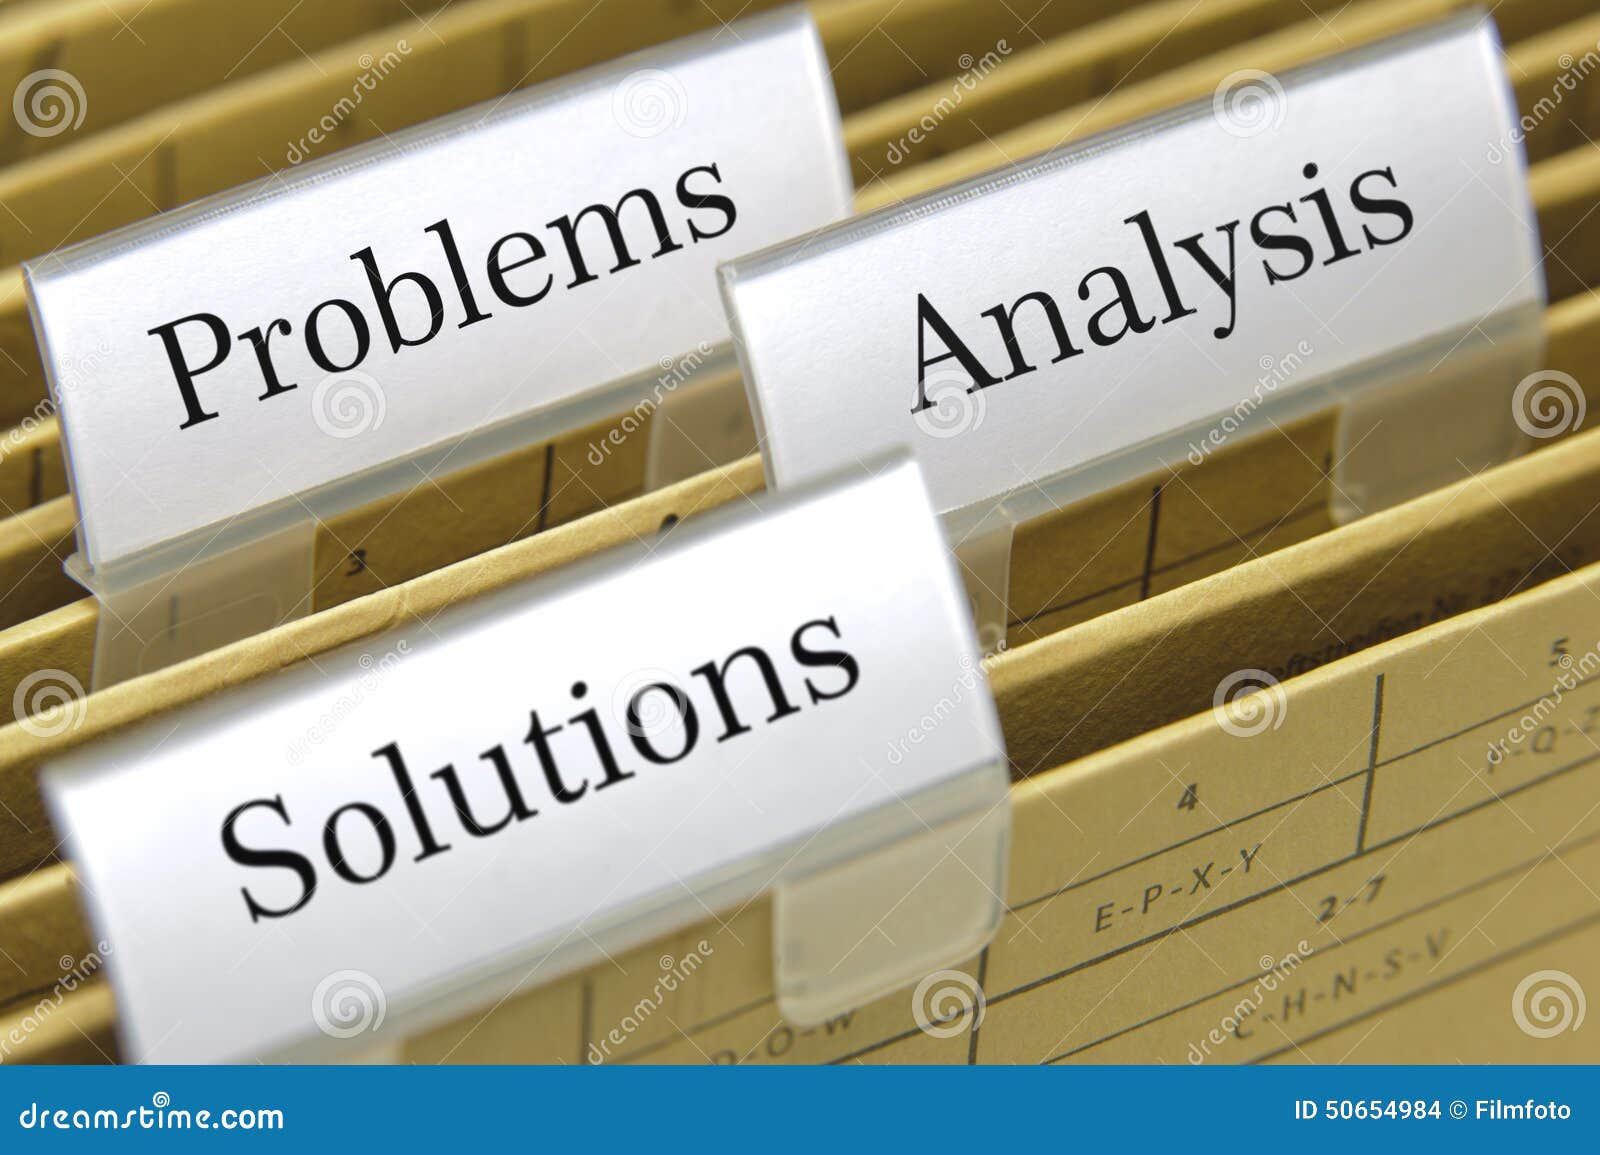 problems, analysis and solutions